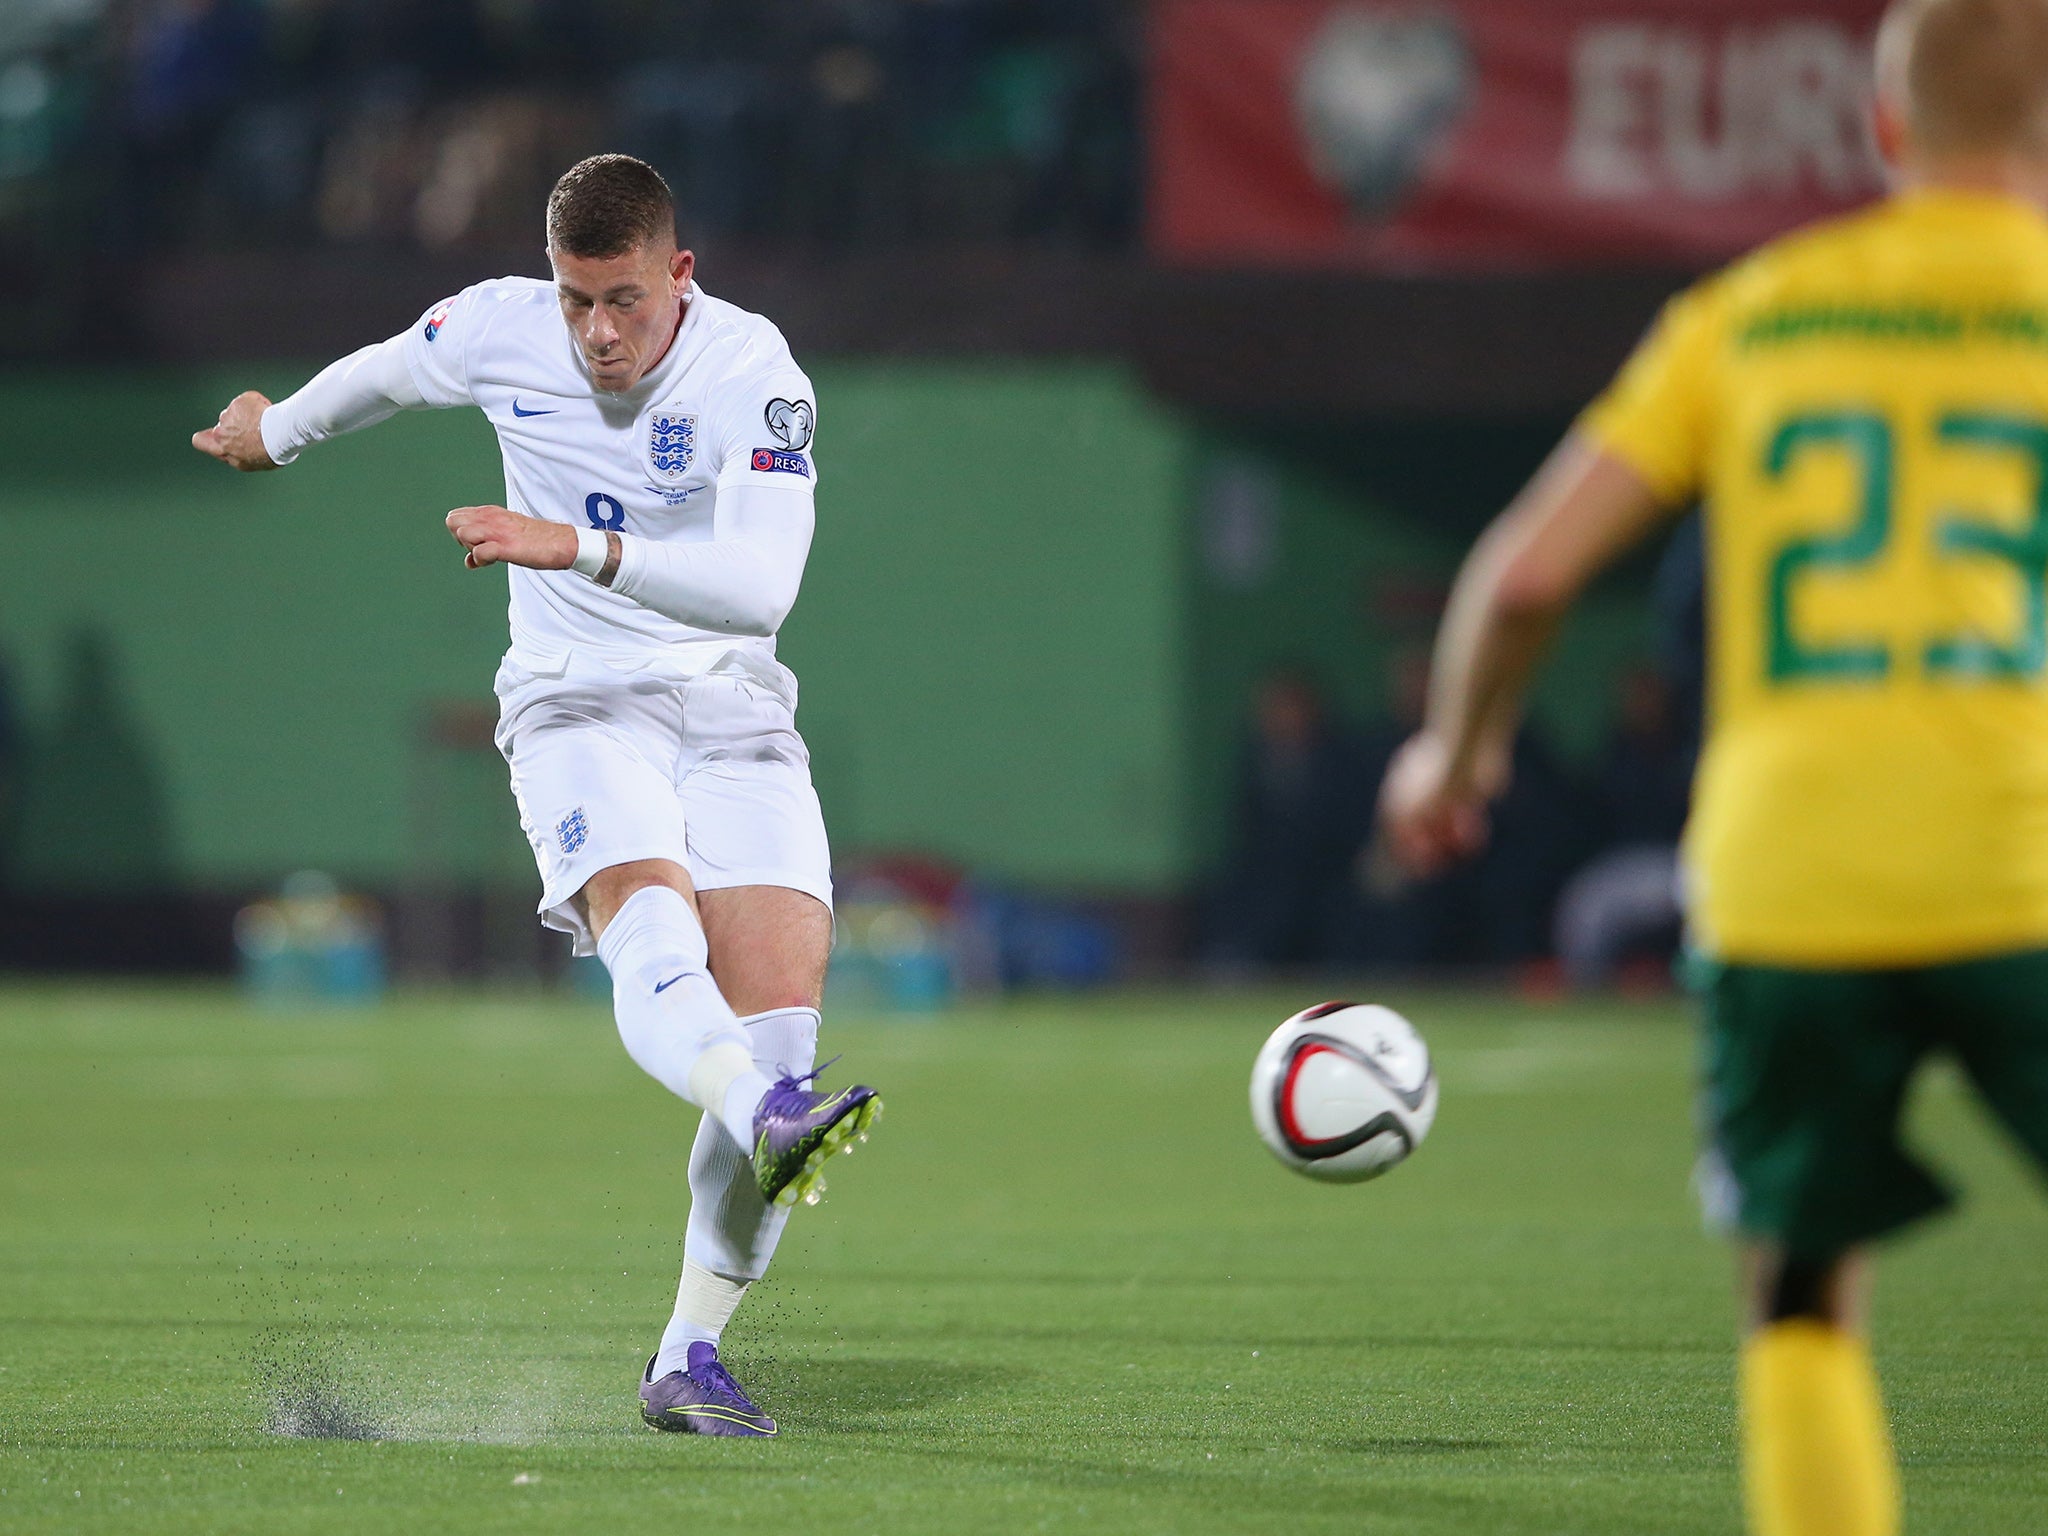 Ross Barkley puts England 1-0 up against Lithuania